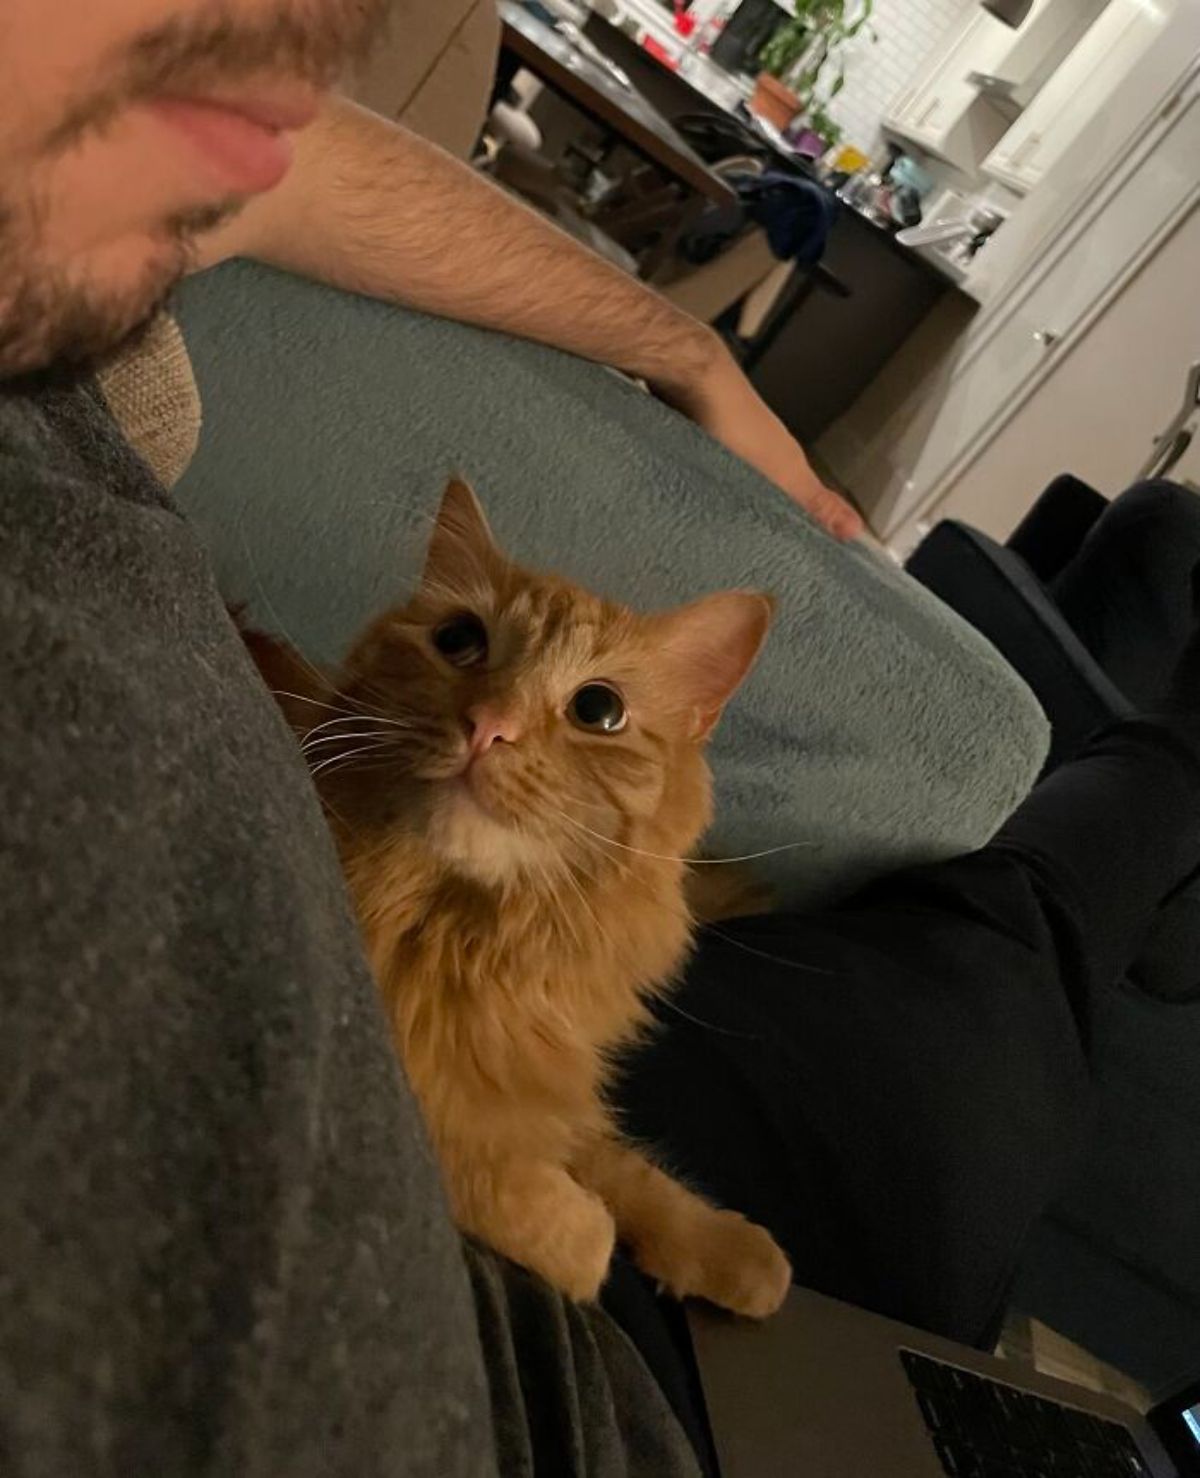 fluffy orange cat looking up lovingly at a man sitting on a green chair